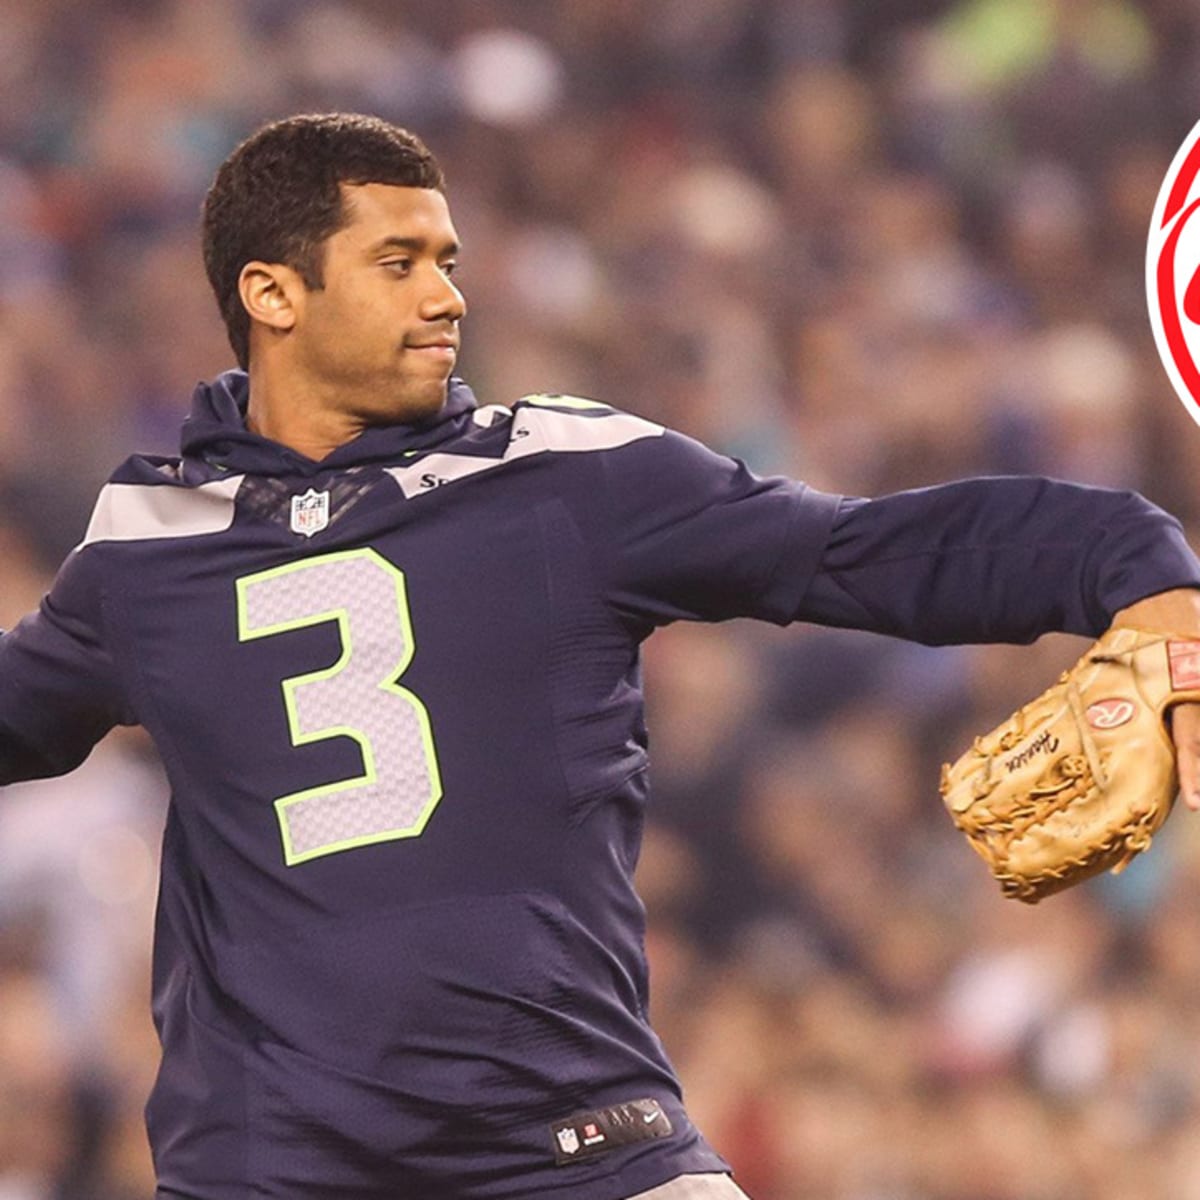 Russell Wilson a hit with Rangers, keeps baseball dream alive